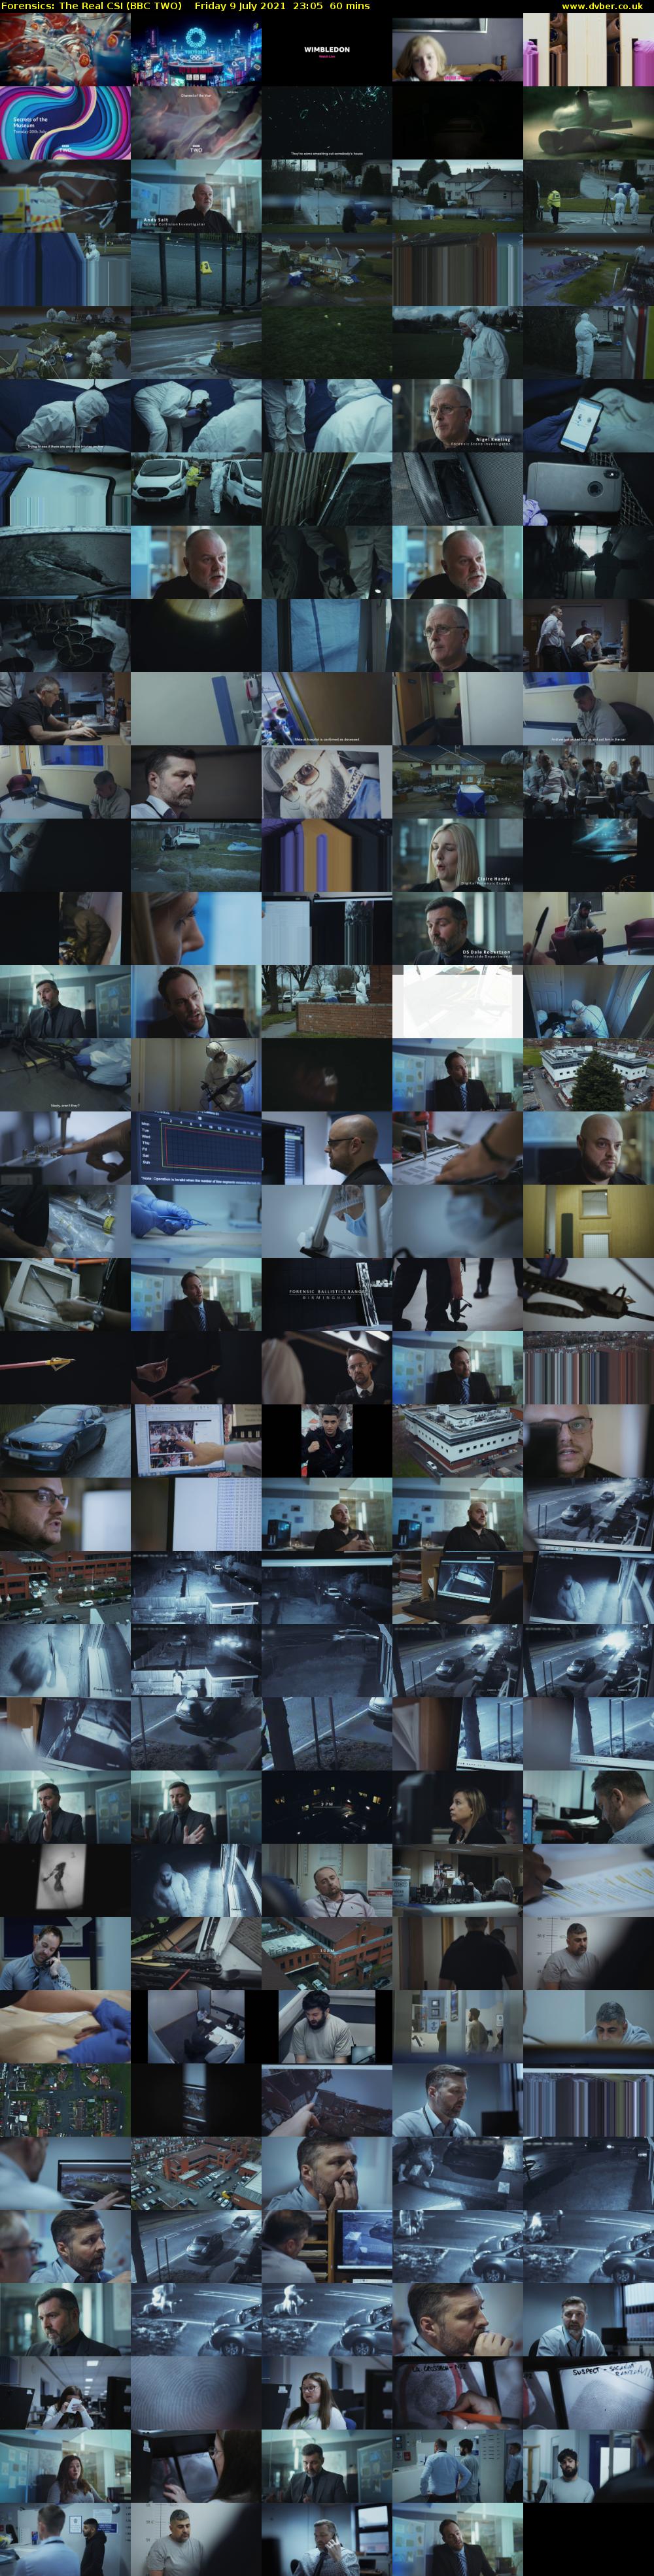 Forensics: The Real CSI (BBC TWO) Friday 9 July 2021 23:05 - 00:05